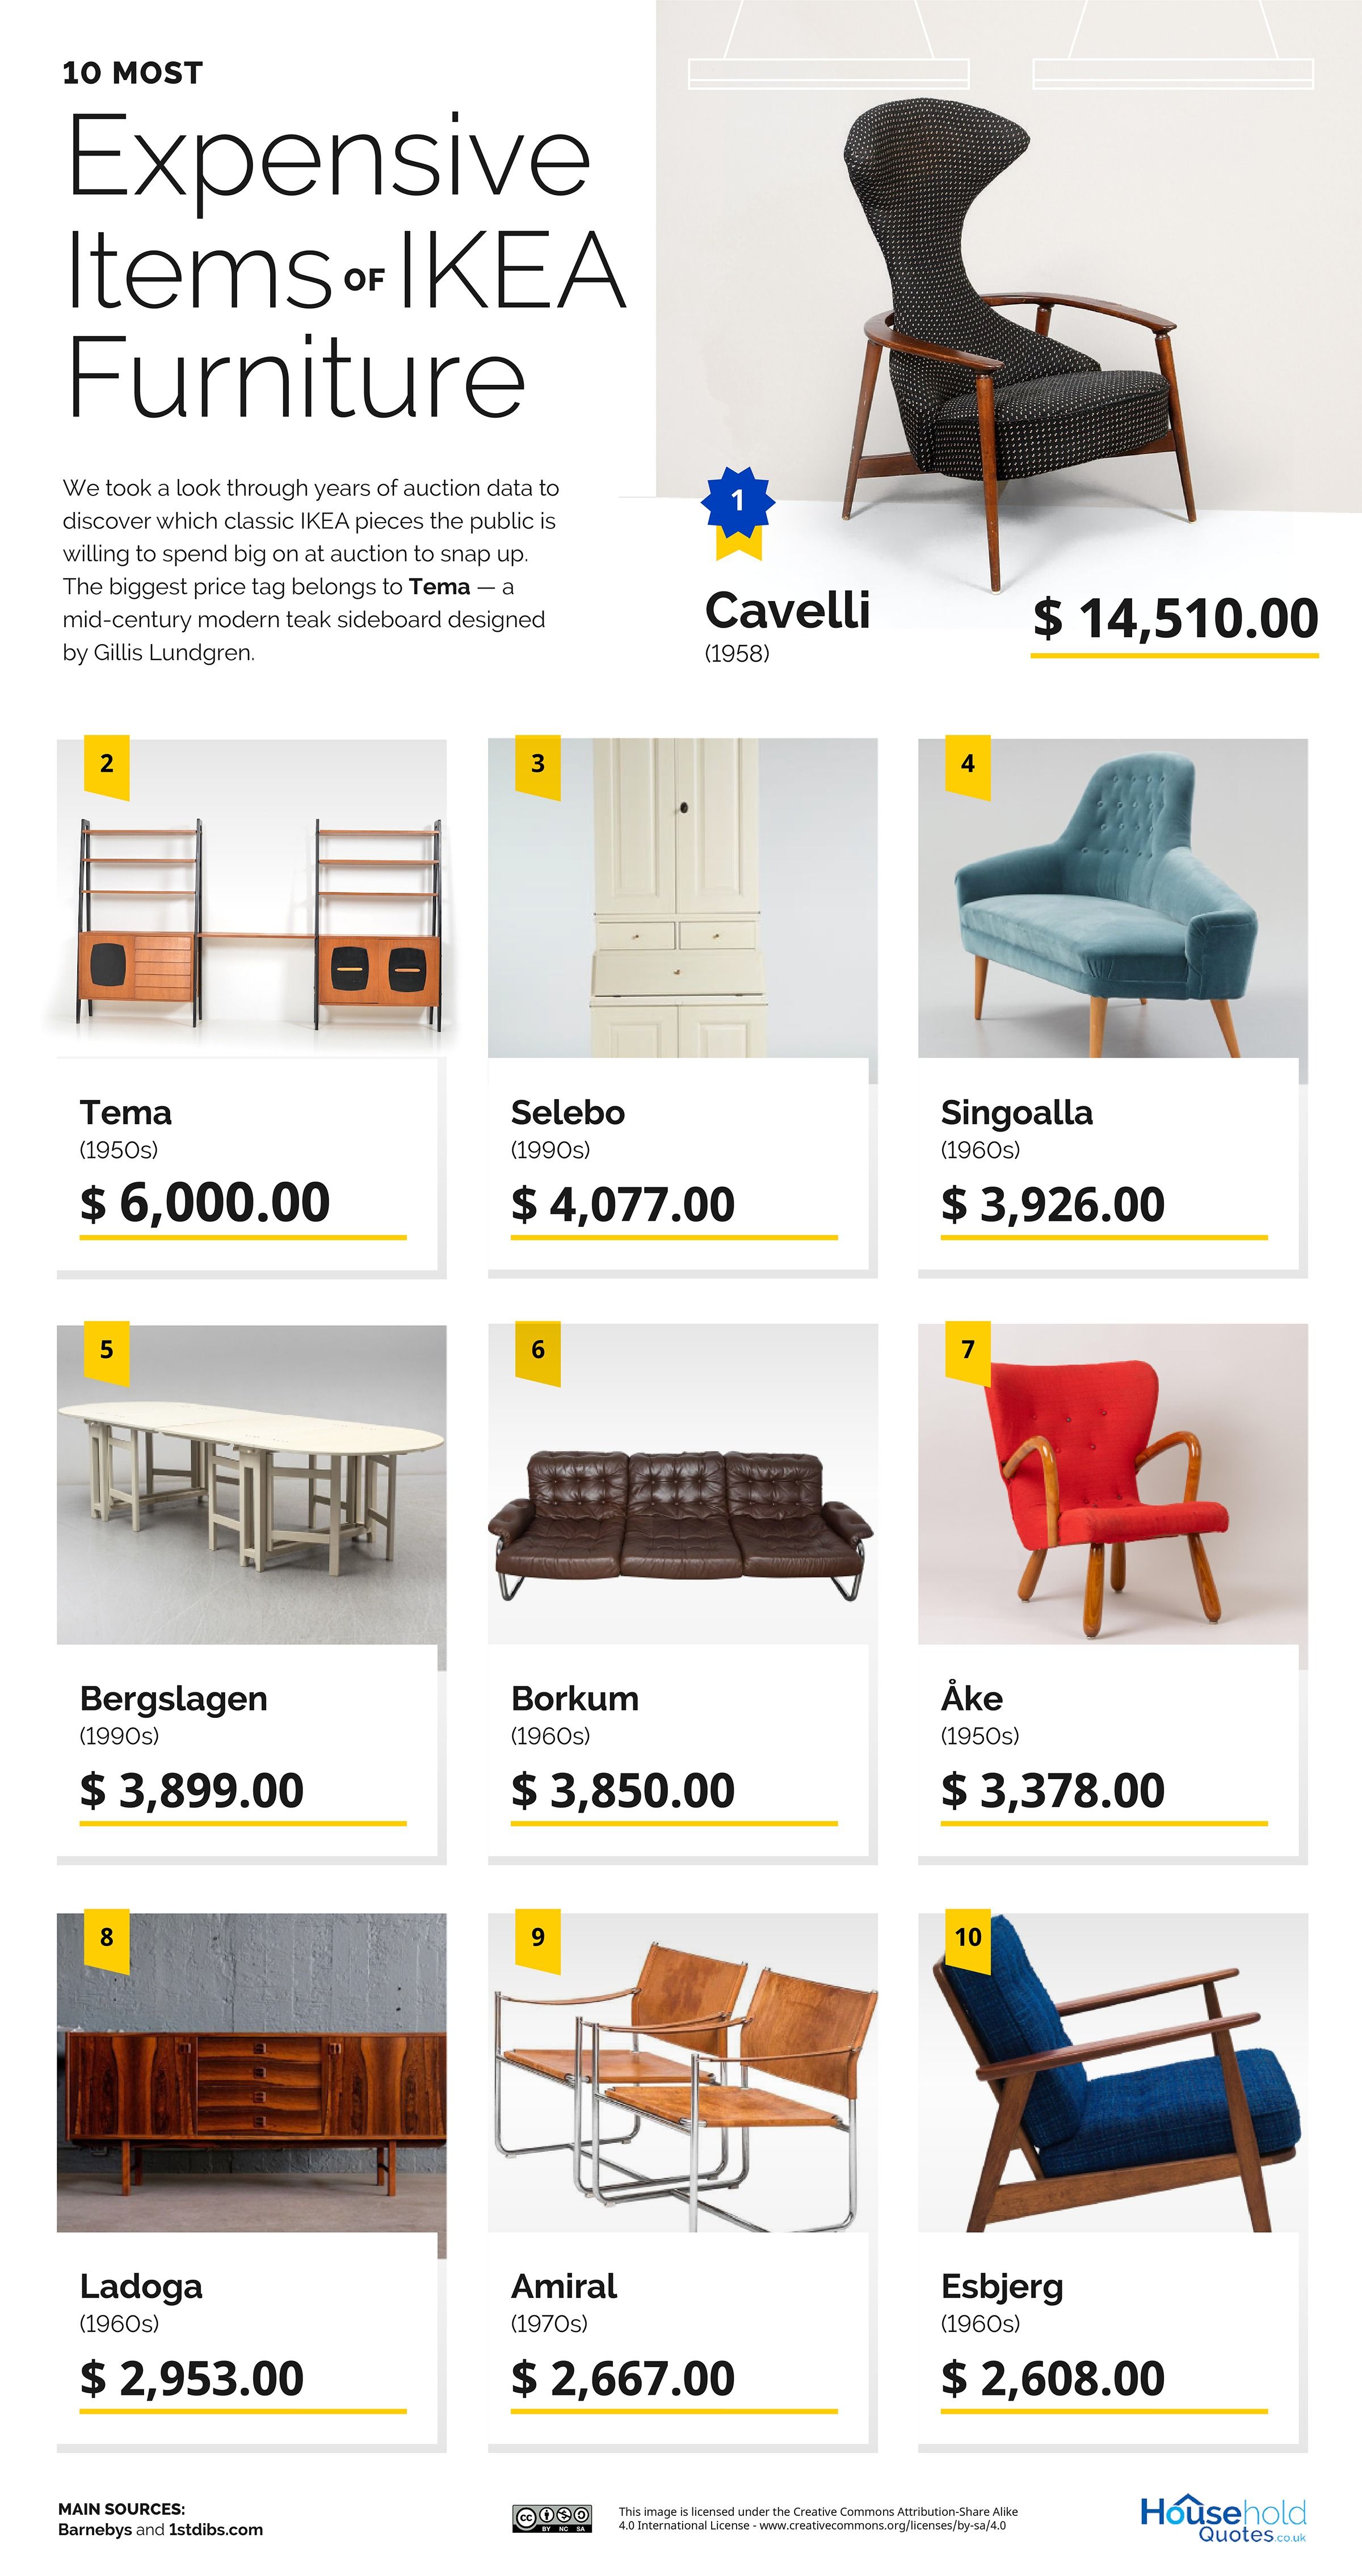 These Are the Most Expensive IKEA Items Ever Sold